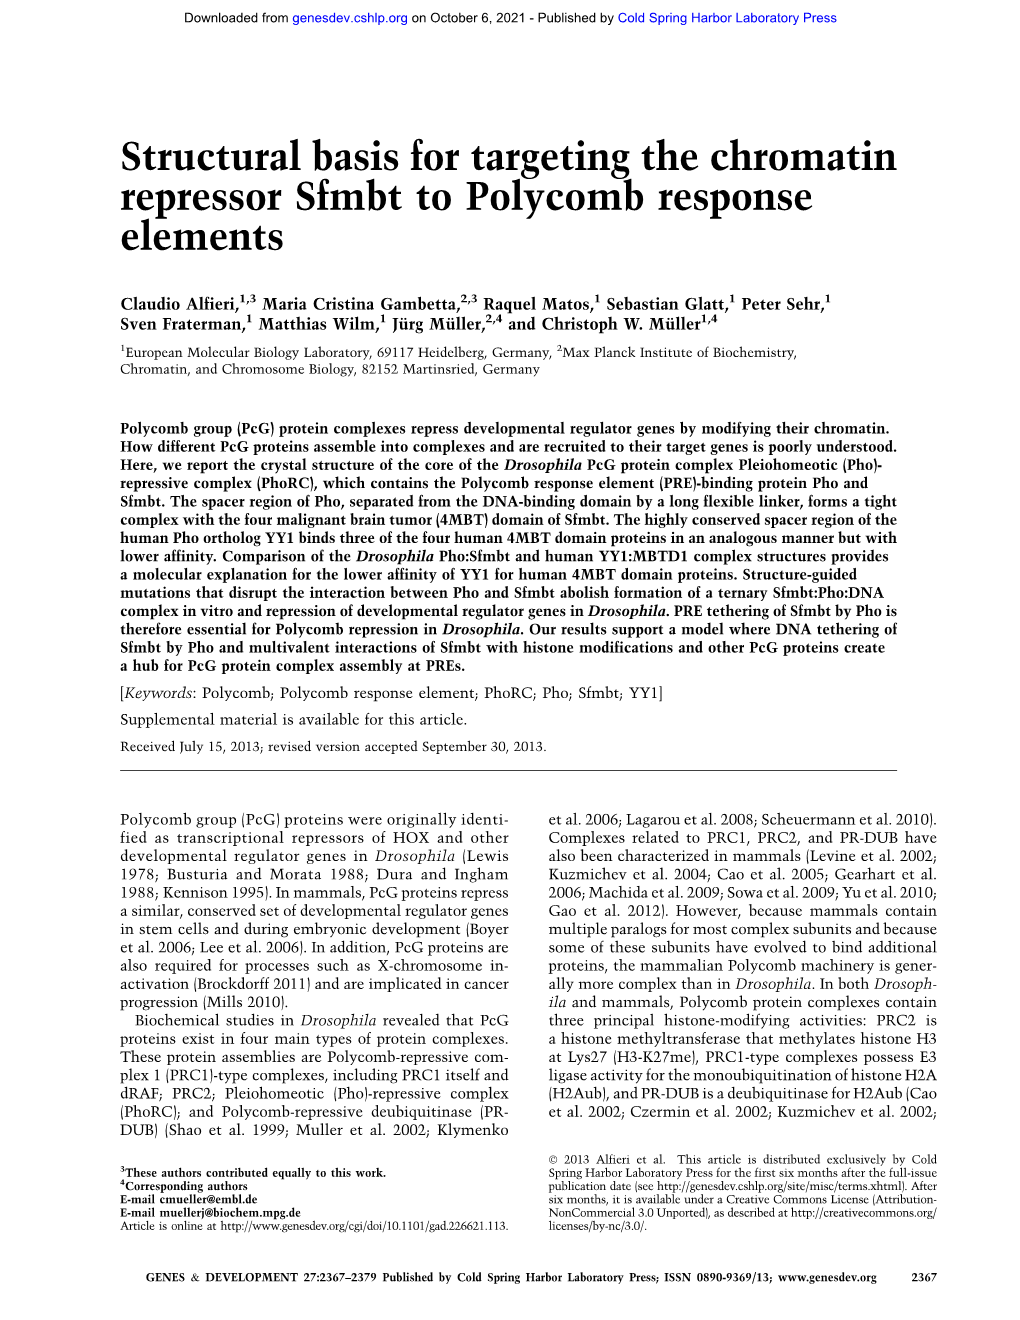 Structural Basis for Targeting the Chromatin Repressor Sfmbt to Polycomb Response Elements